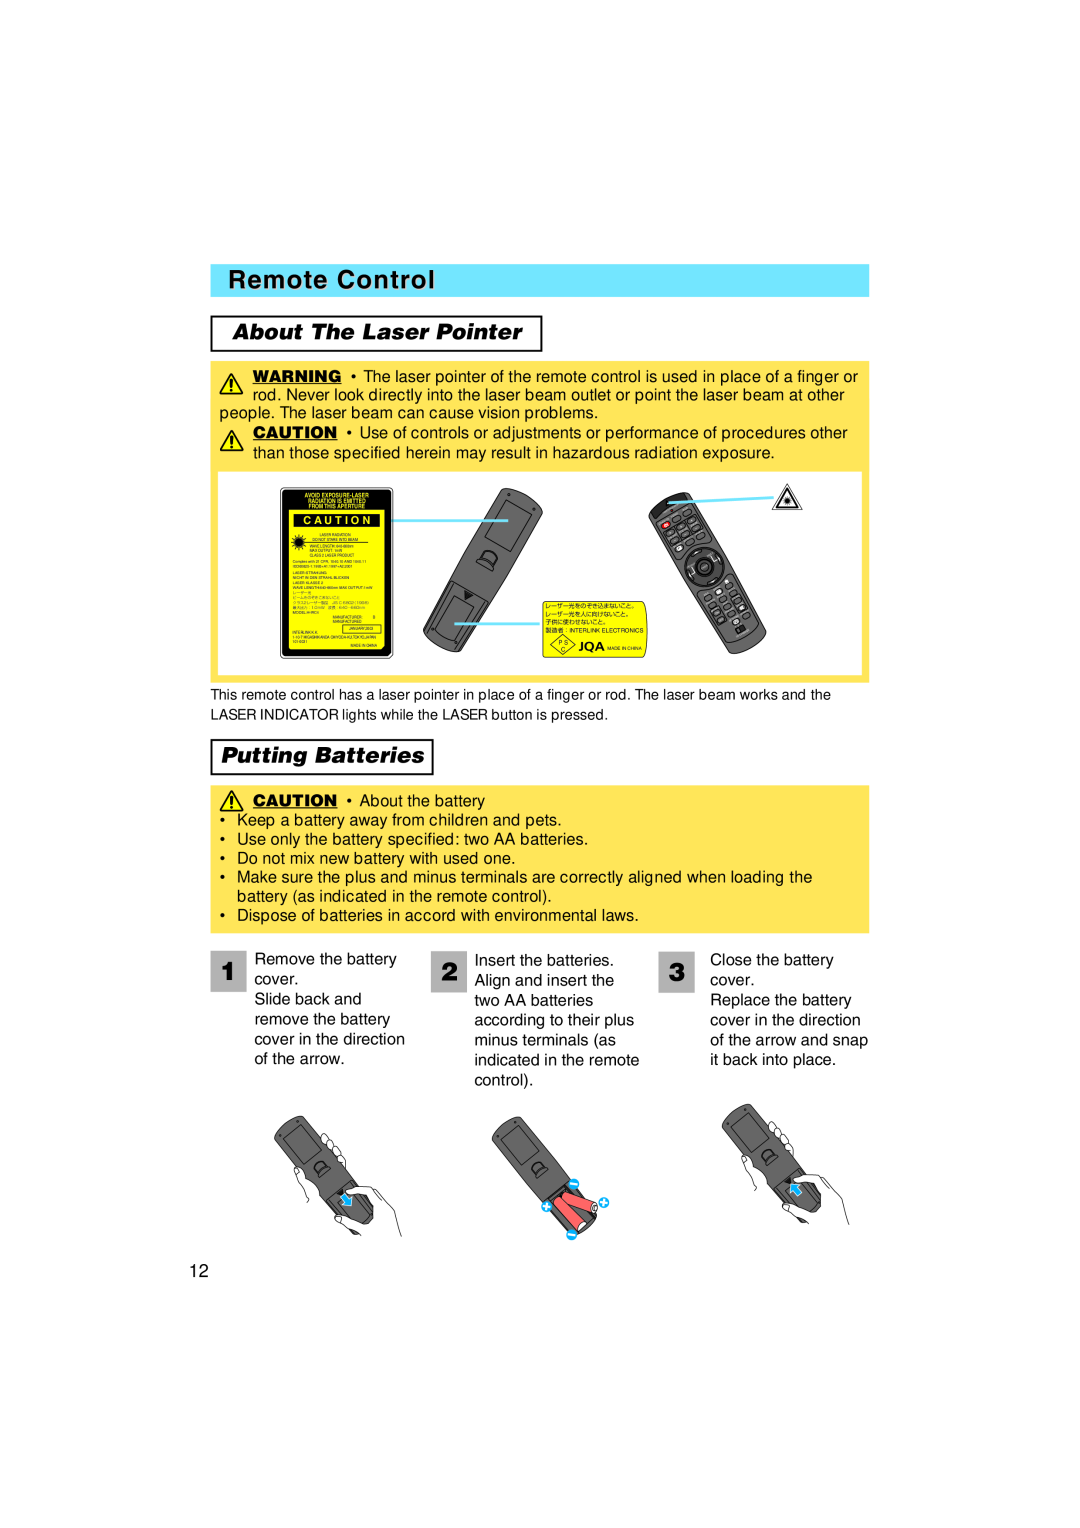 BOXLIGHT MP-58i, MP-57i user manual Remote Control, About The Laser Pointer, Putting Batteries 